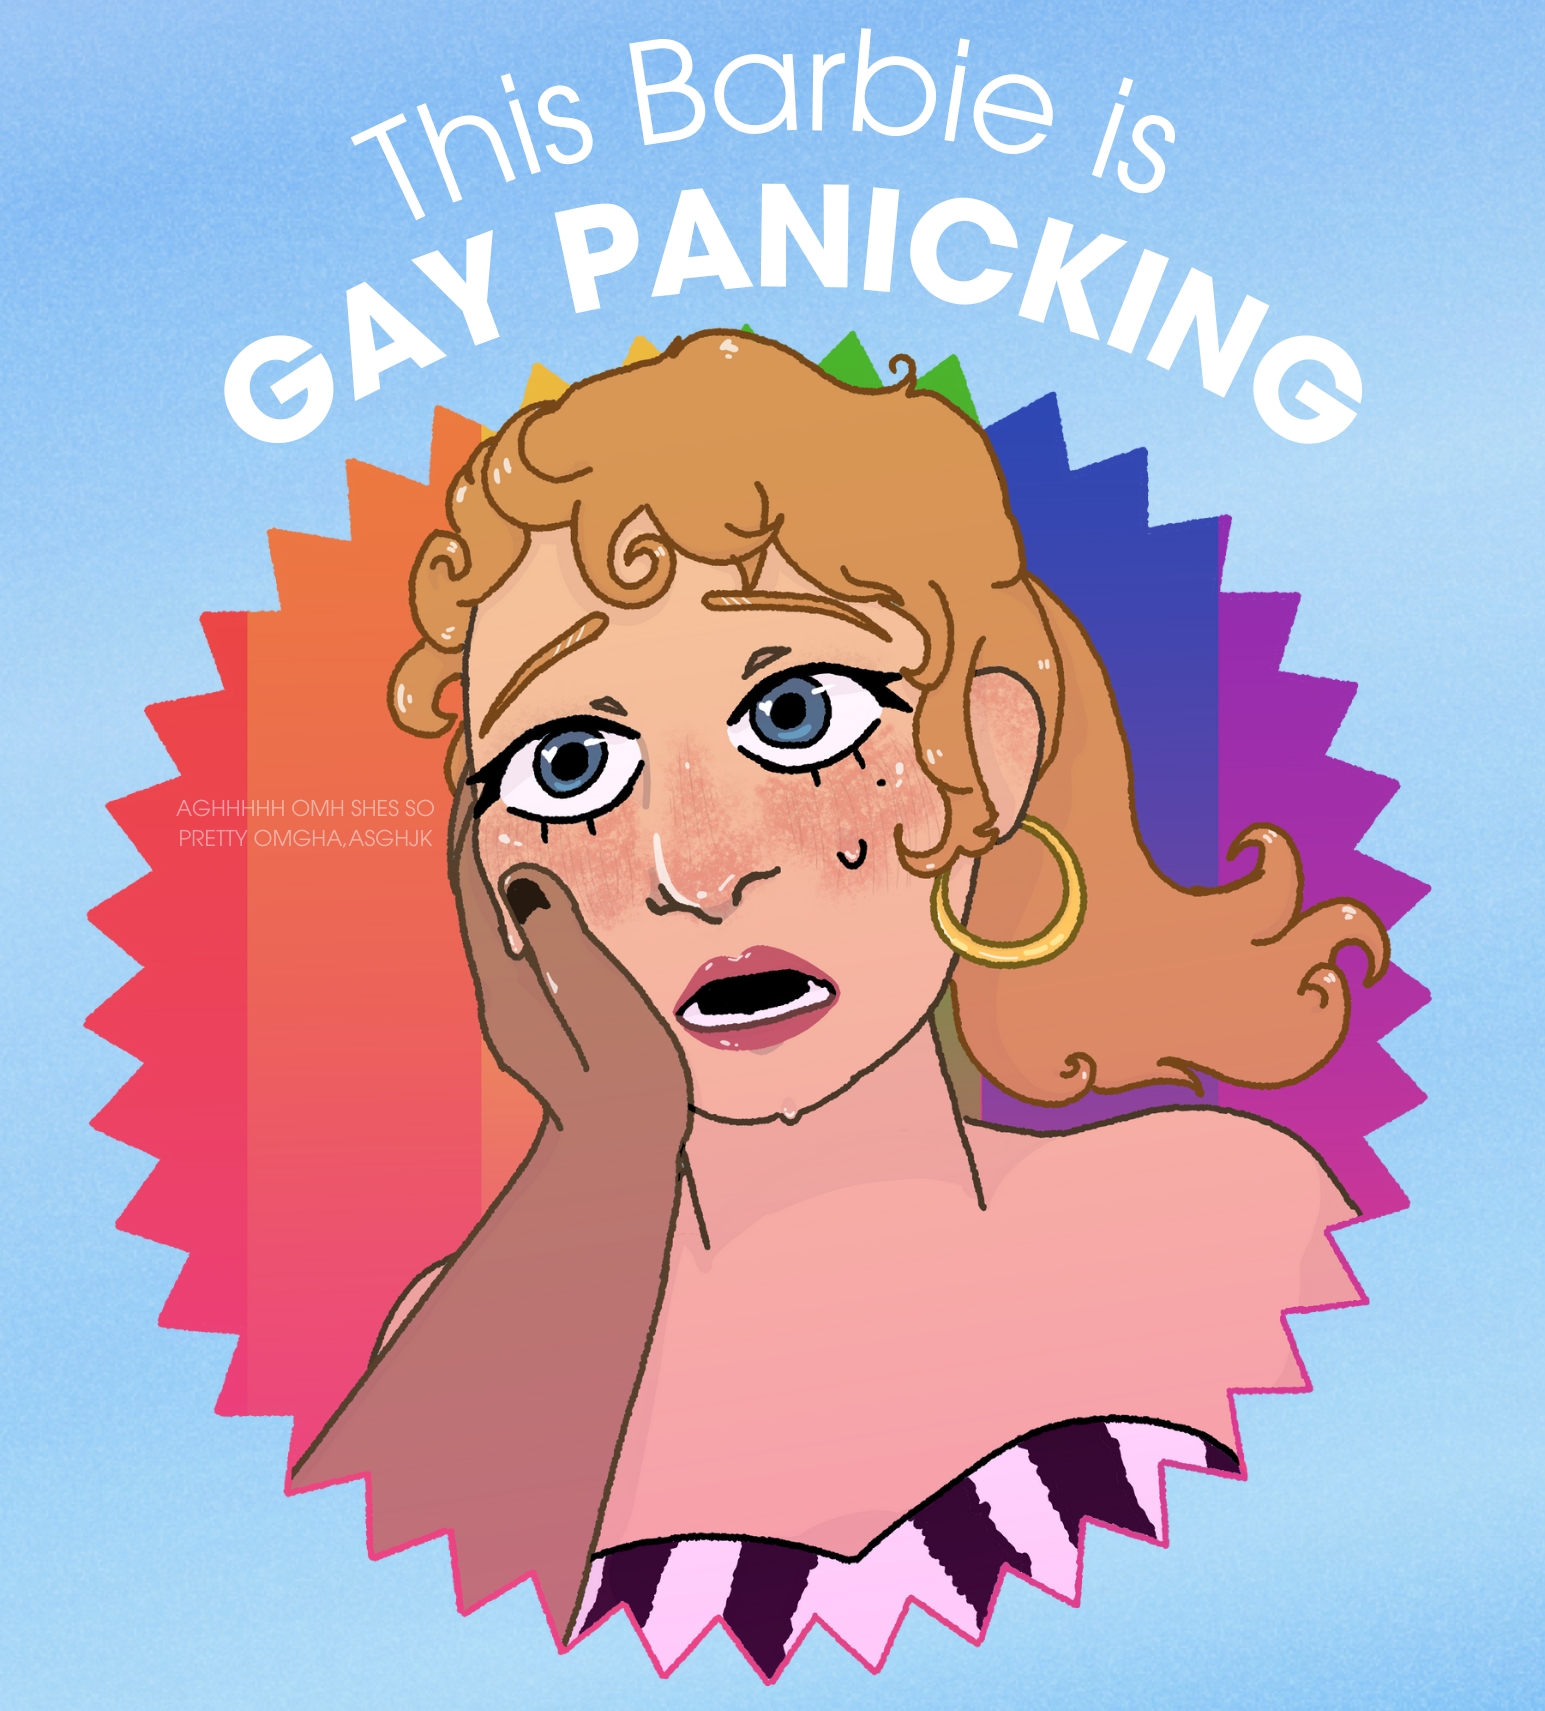 A digital illustration of Barbie, a blonde white woman with blue eyes in a black and white striped top and gold hoop earrings. She looks alarmed. Another woman with a brown skin tone and black nail polish cups Barbie's cheek. The Mattel logo in rainbow is behind Barbie. The top text reads "This Barbie is GAY PANICKING." Next to Barbie, the text reads, "AGHHHHH OMH SHE'S SO PRETTY OMGHA,ASGHJK." The entire image's background is light blue.